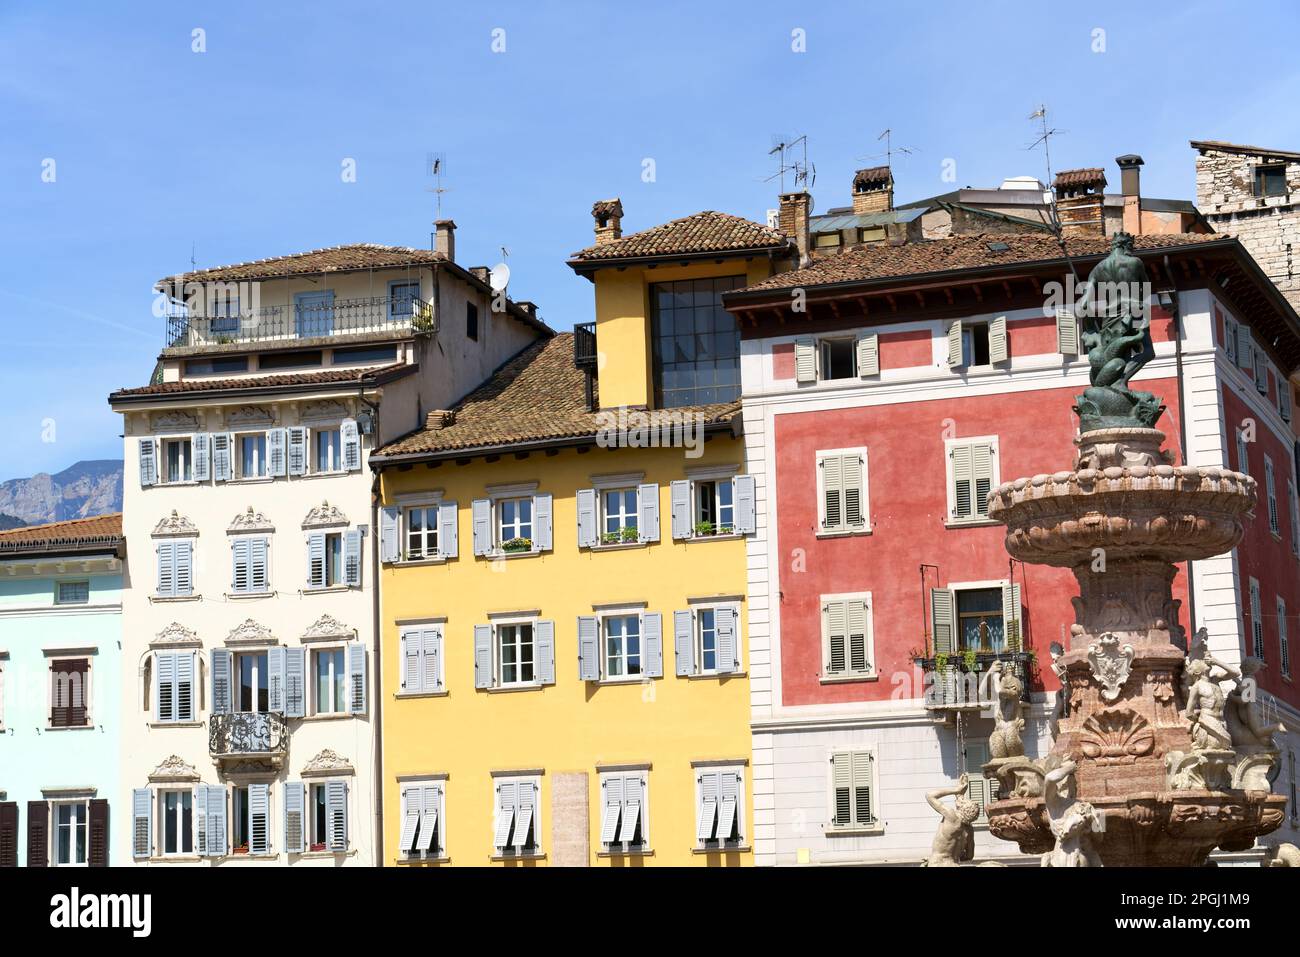 The Neptune fountain and Piazza del Duomo (Cathedral Square) that is the main square of Trento, located in the historical center of the town, appeared Stock Photo